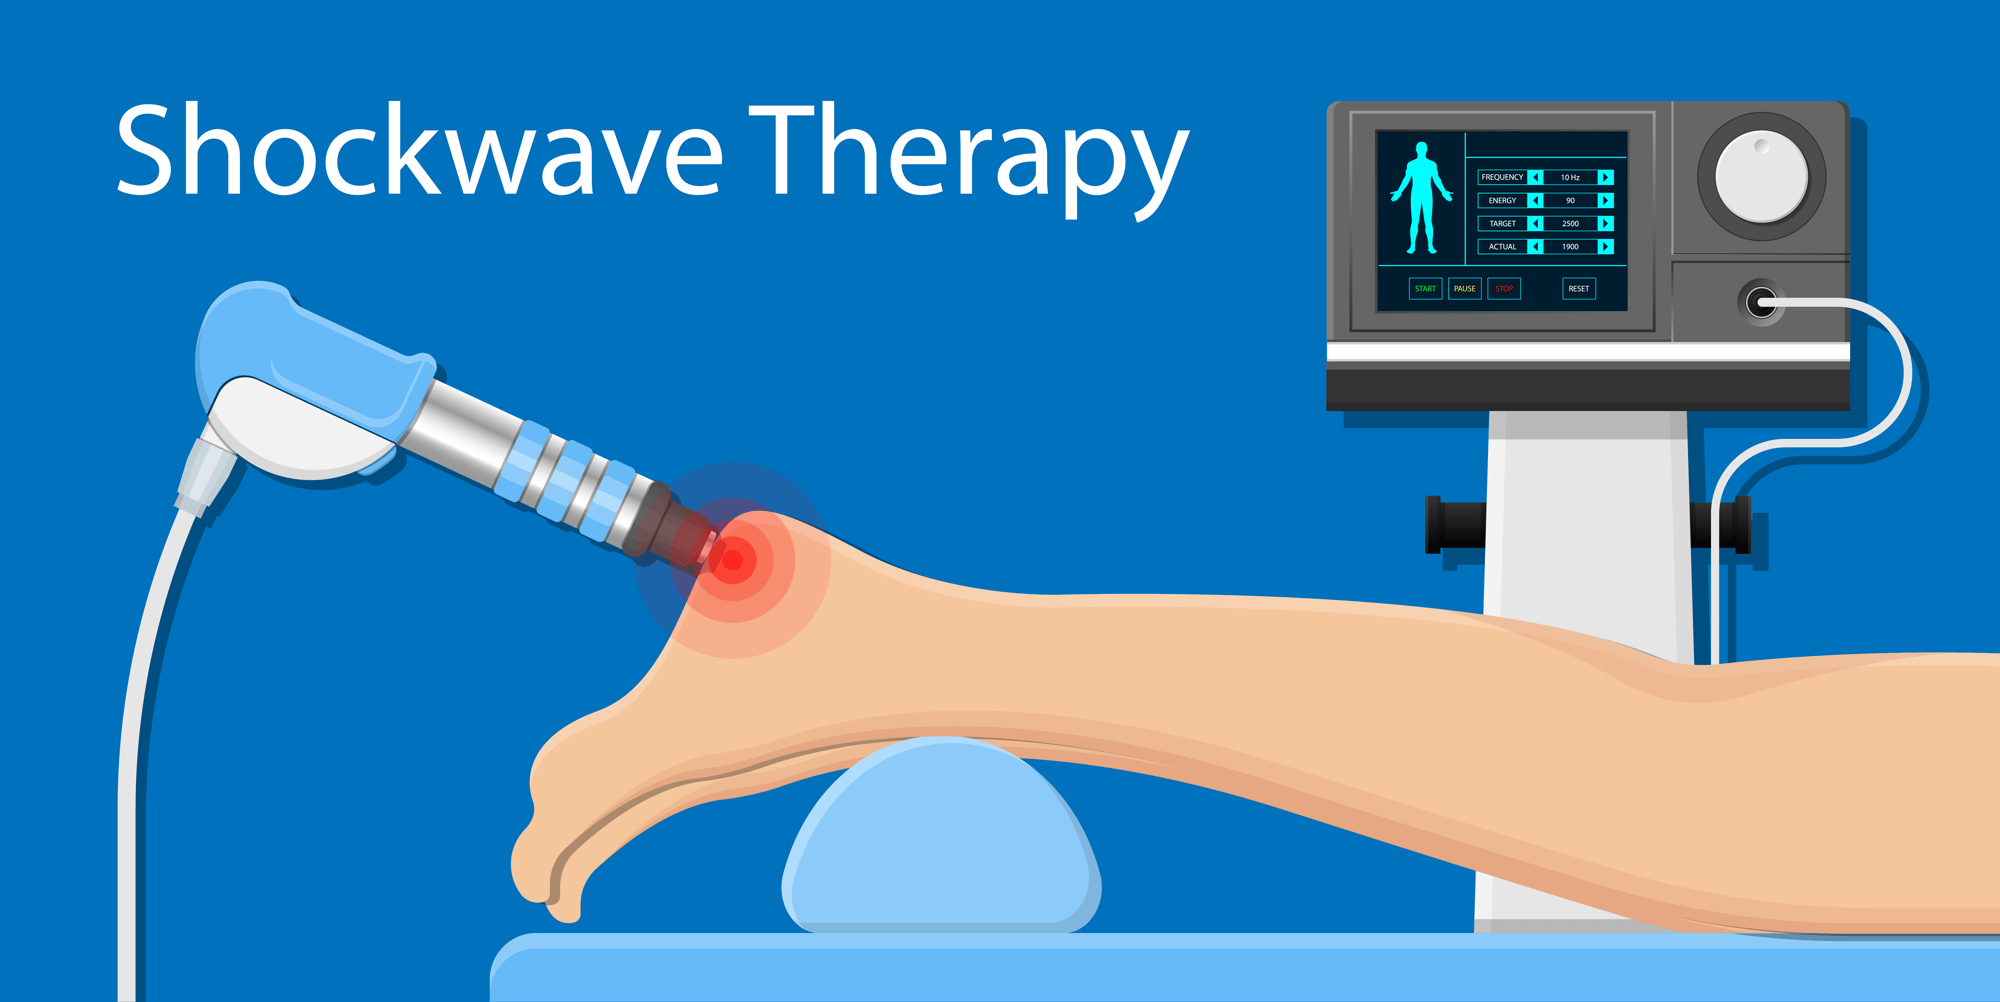 Focused shockwave Therapy